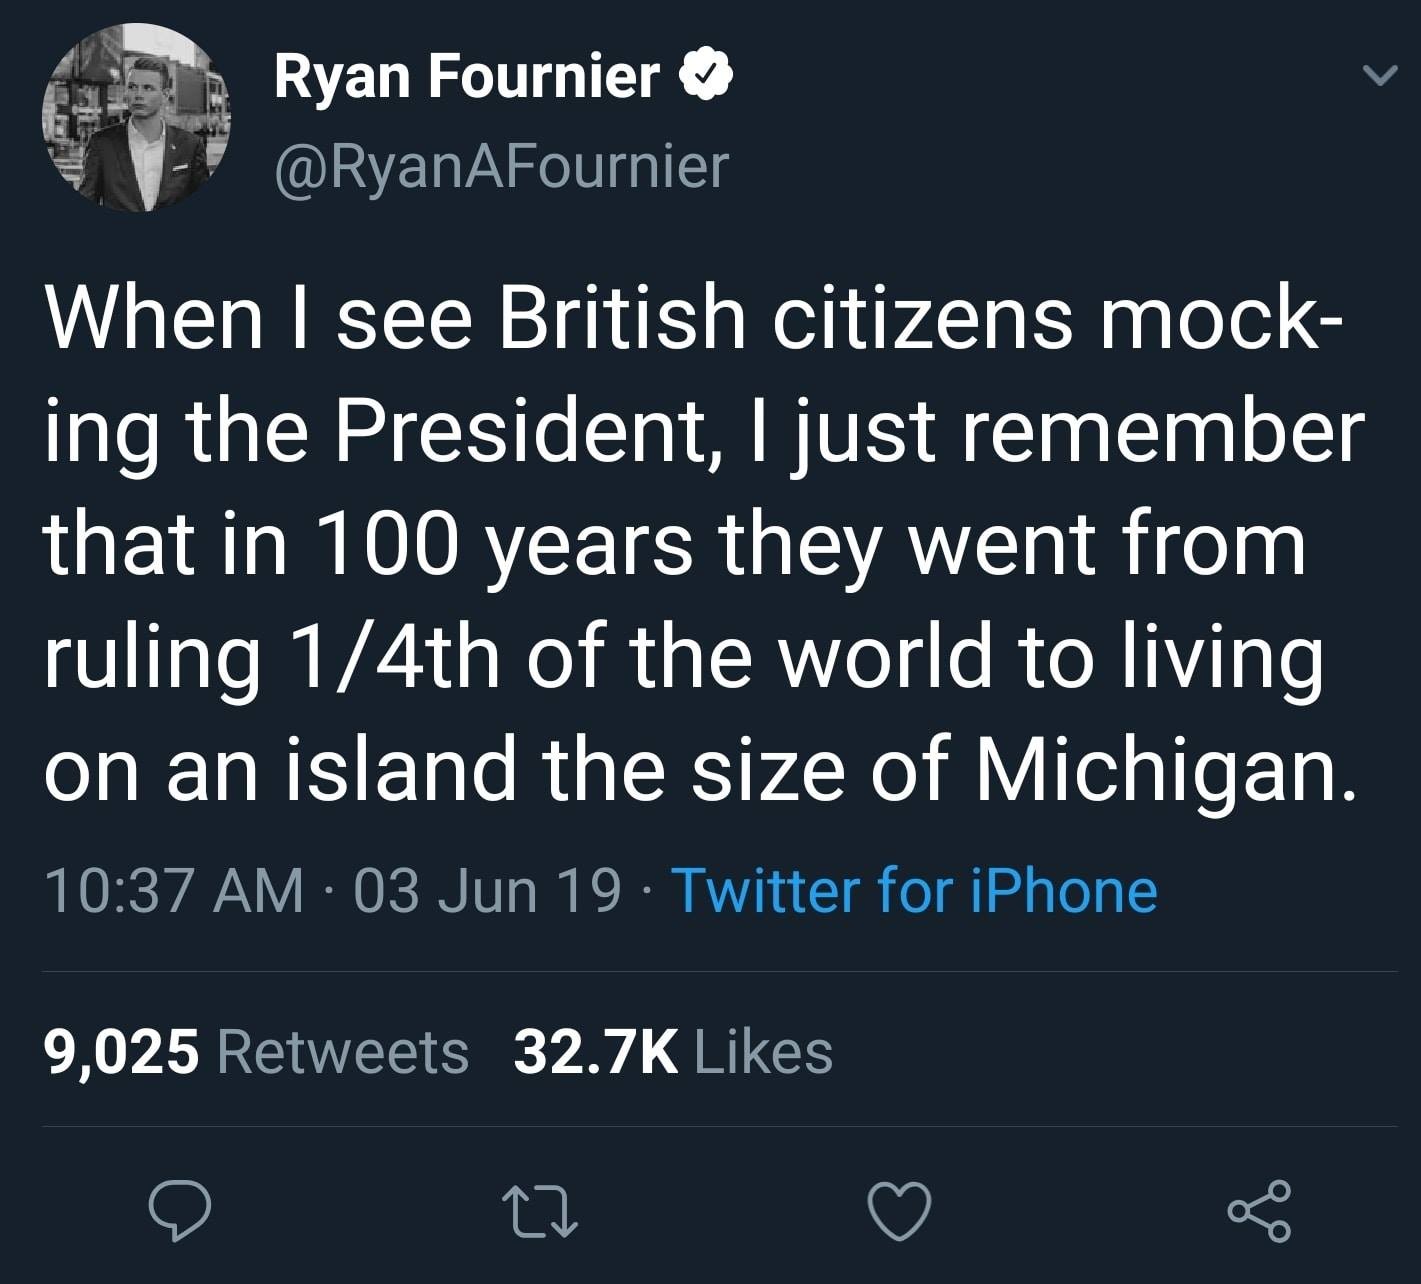 manila encounters - Ryan Fournier When I see British citizens mock ing the President, I just remember that in 100 years they went from ruling 14th of the world to living on an island the size of Michigan. 03 Jun 19. Twitter for iPhone 9,025